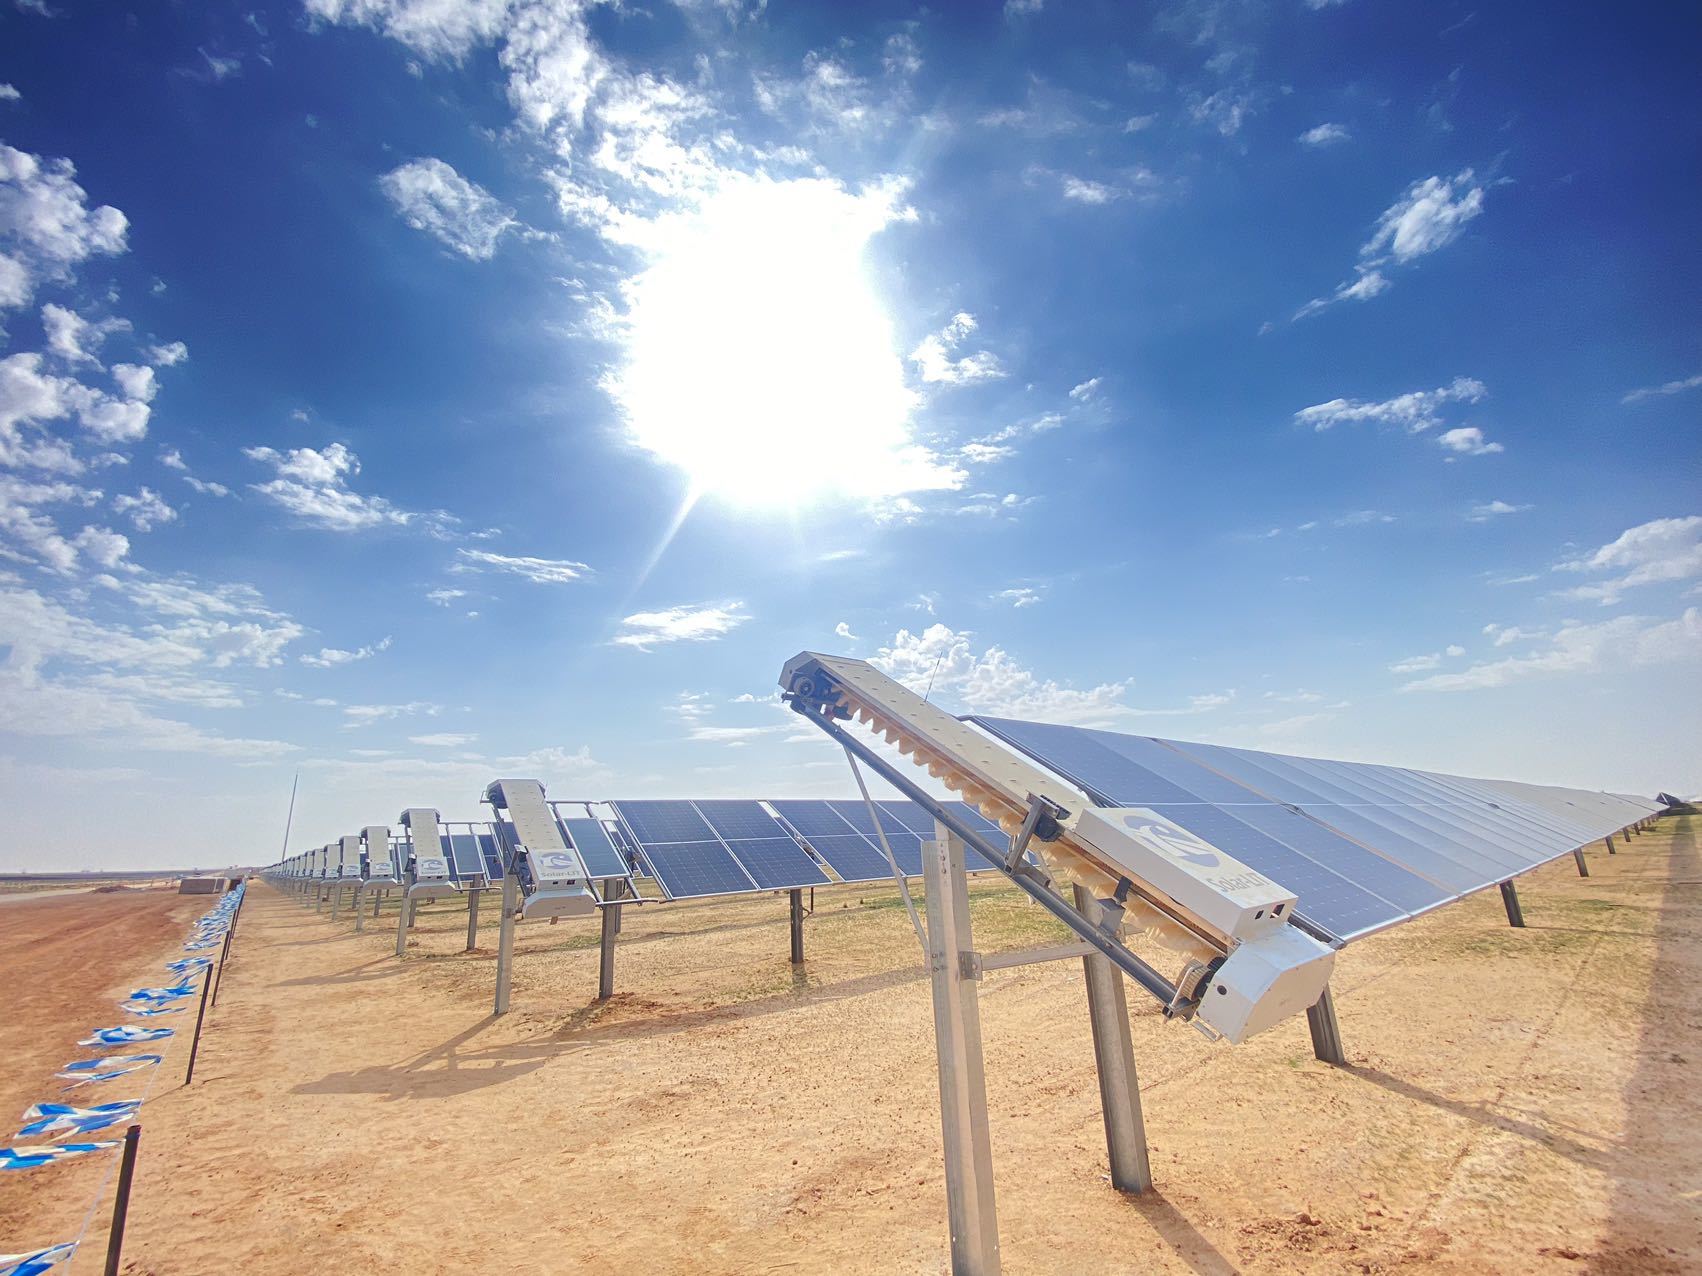 A new industry benchmark! In only 2 months, Solar-LIT completed the ARCS commissioning of 1.2GW solar in Sudair Project